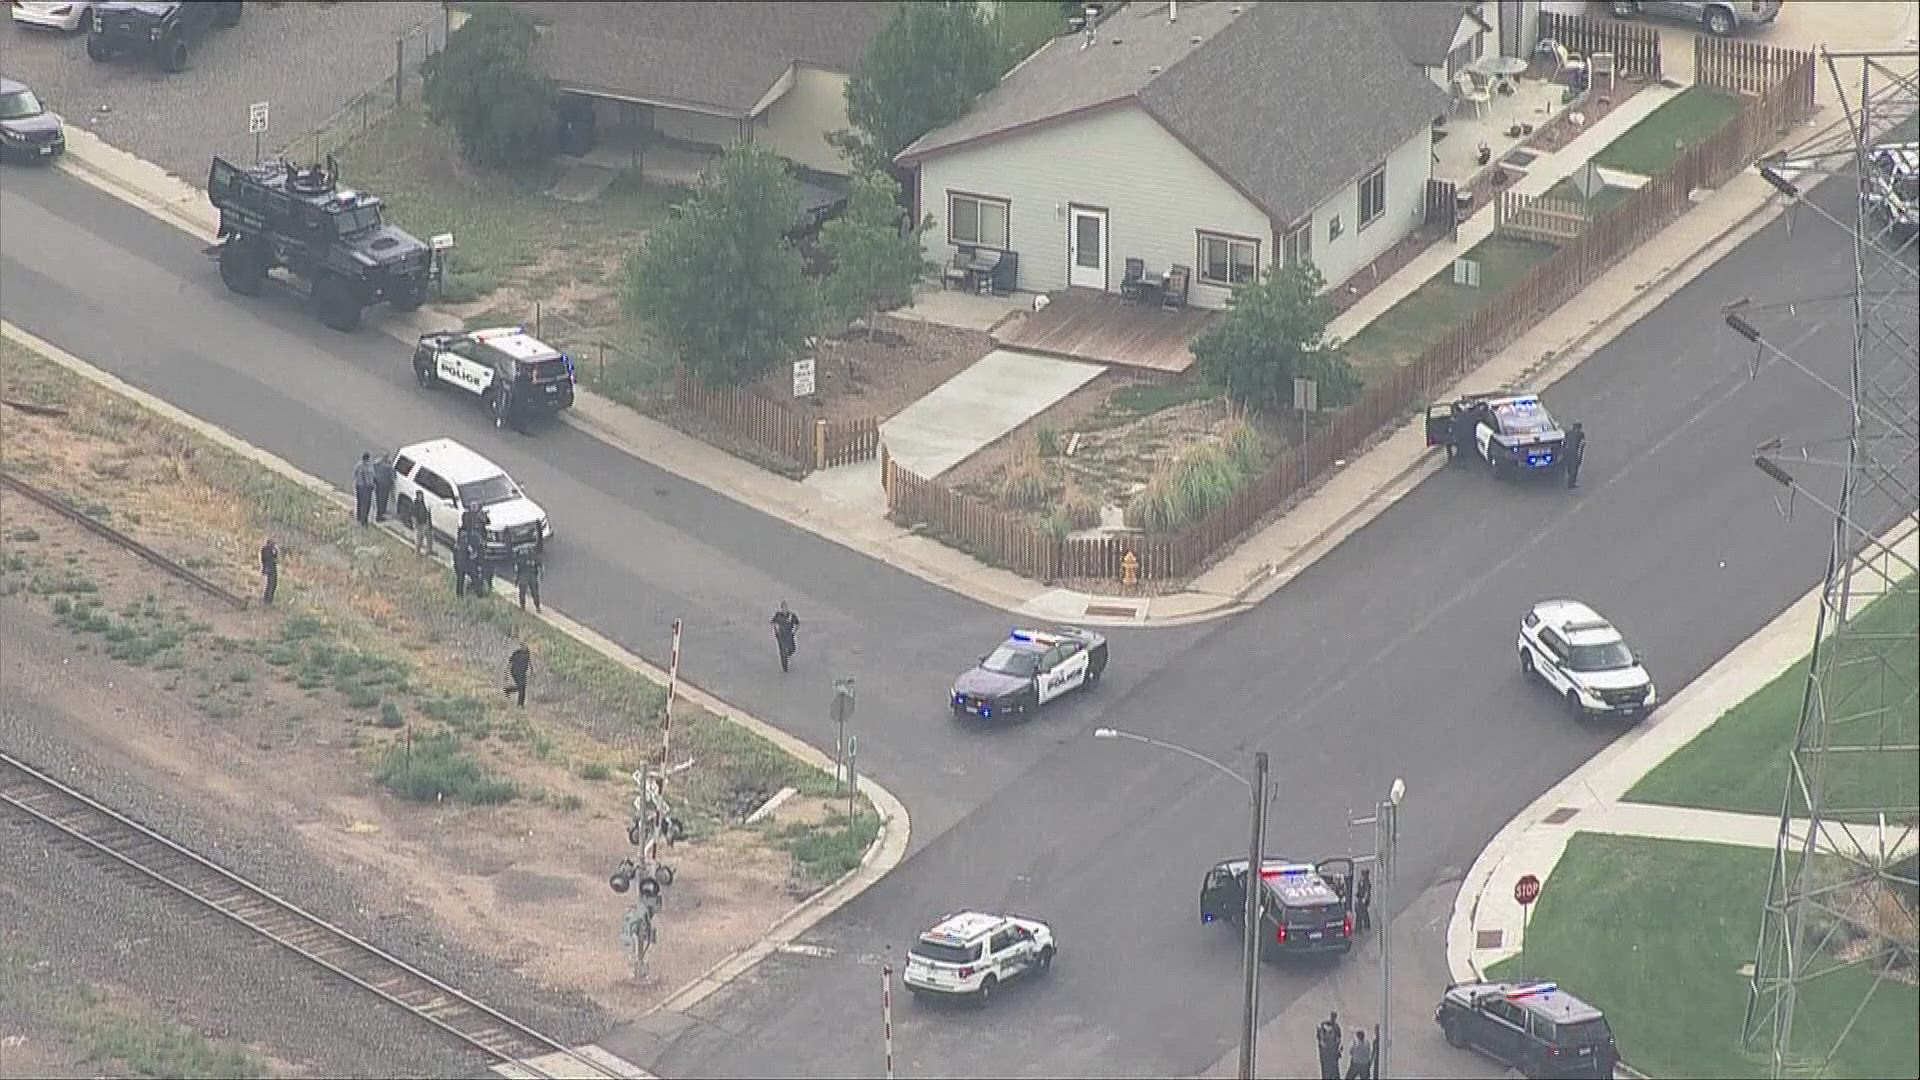 Police officers were searching a home near Fairfax Park in Commerce City, Colorado, after a shooting Tuesday night.